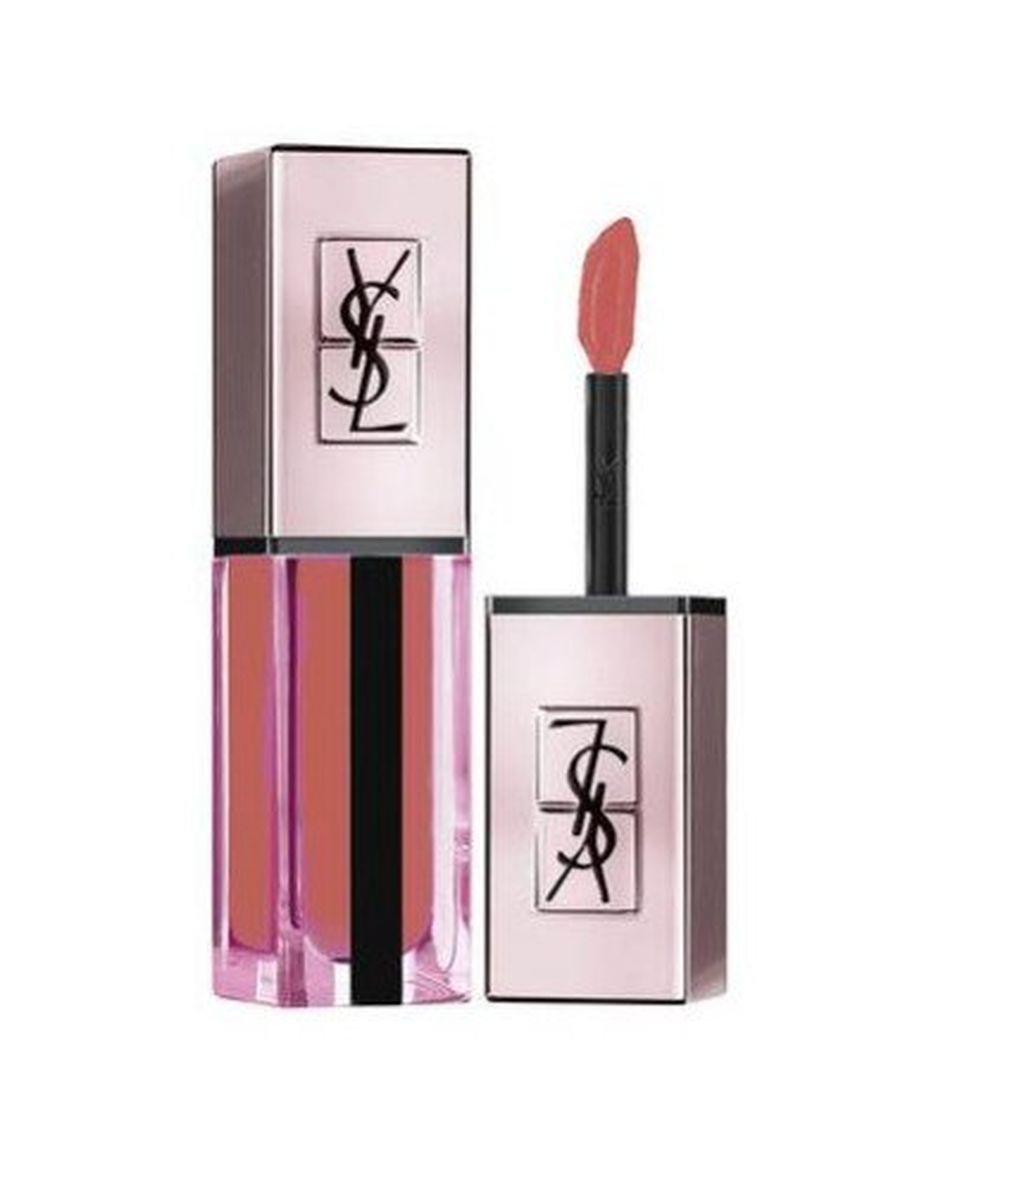 vernis-a-levres-exclusive-water-stain-glow-lip-gloss-YSL